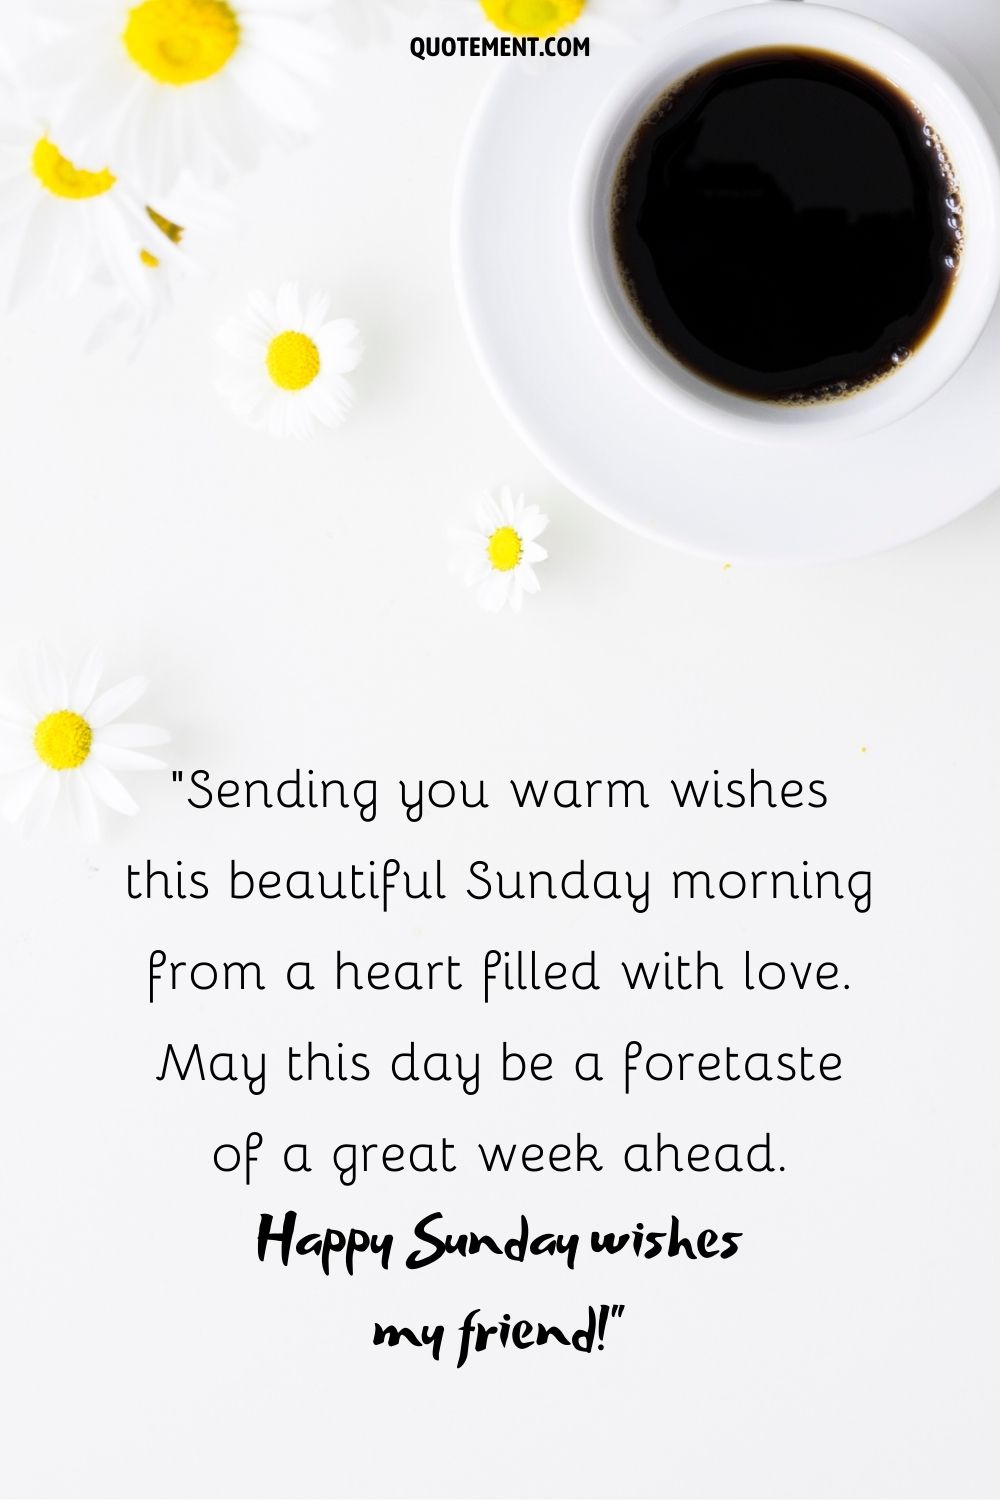 small white flowers and coffe representing happy sunday blessings image